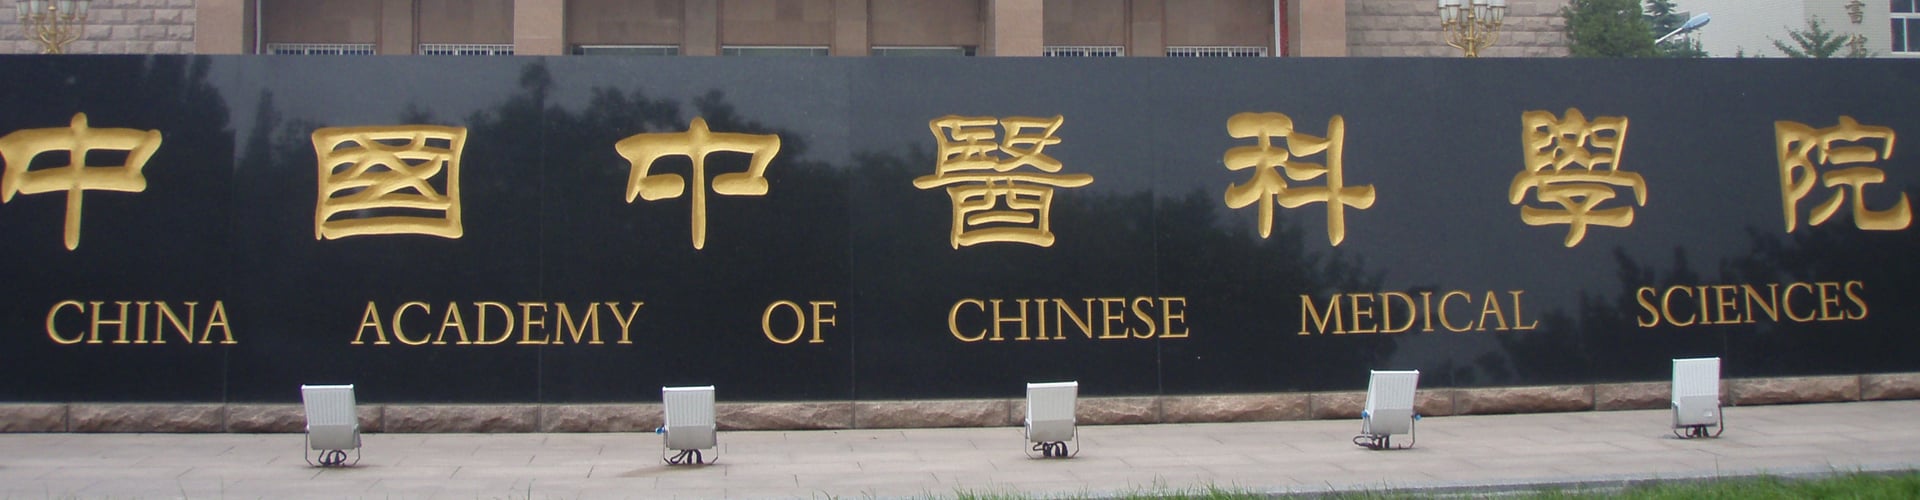 China Academy Of Chinese Medical Sciences